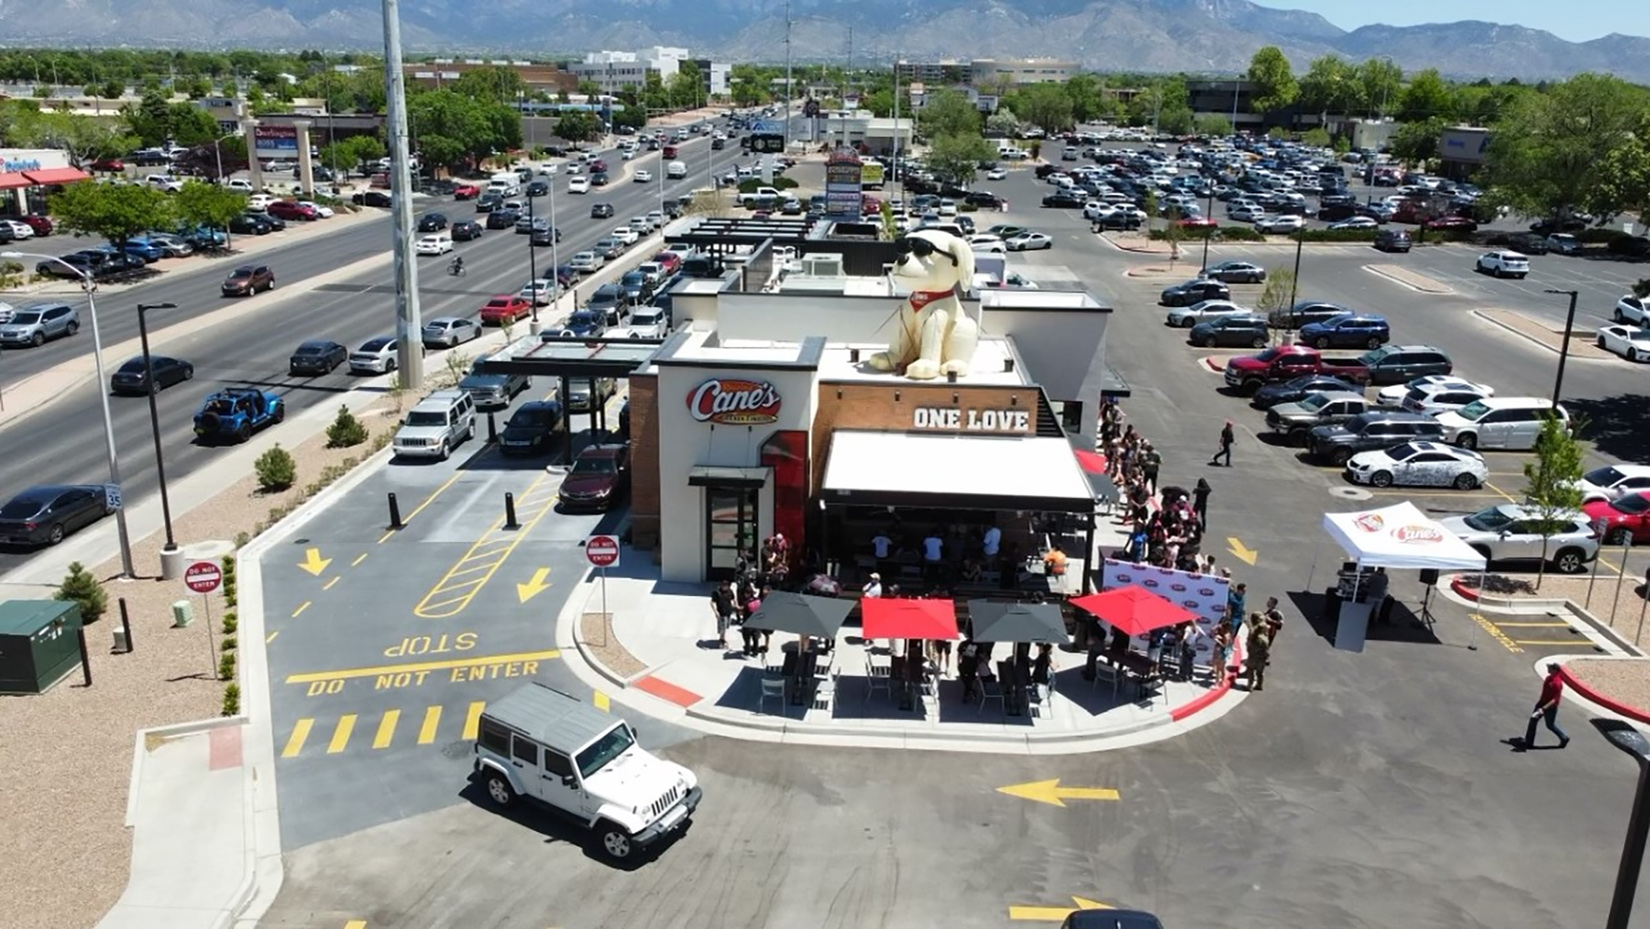 Hanley Investment Group Arranges Sale of First New Raising Cane's Drive-Thru in Albuquerque, New Mexico